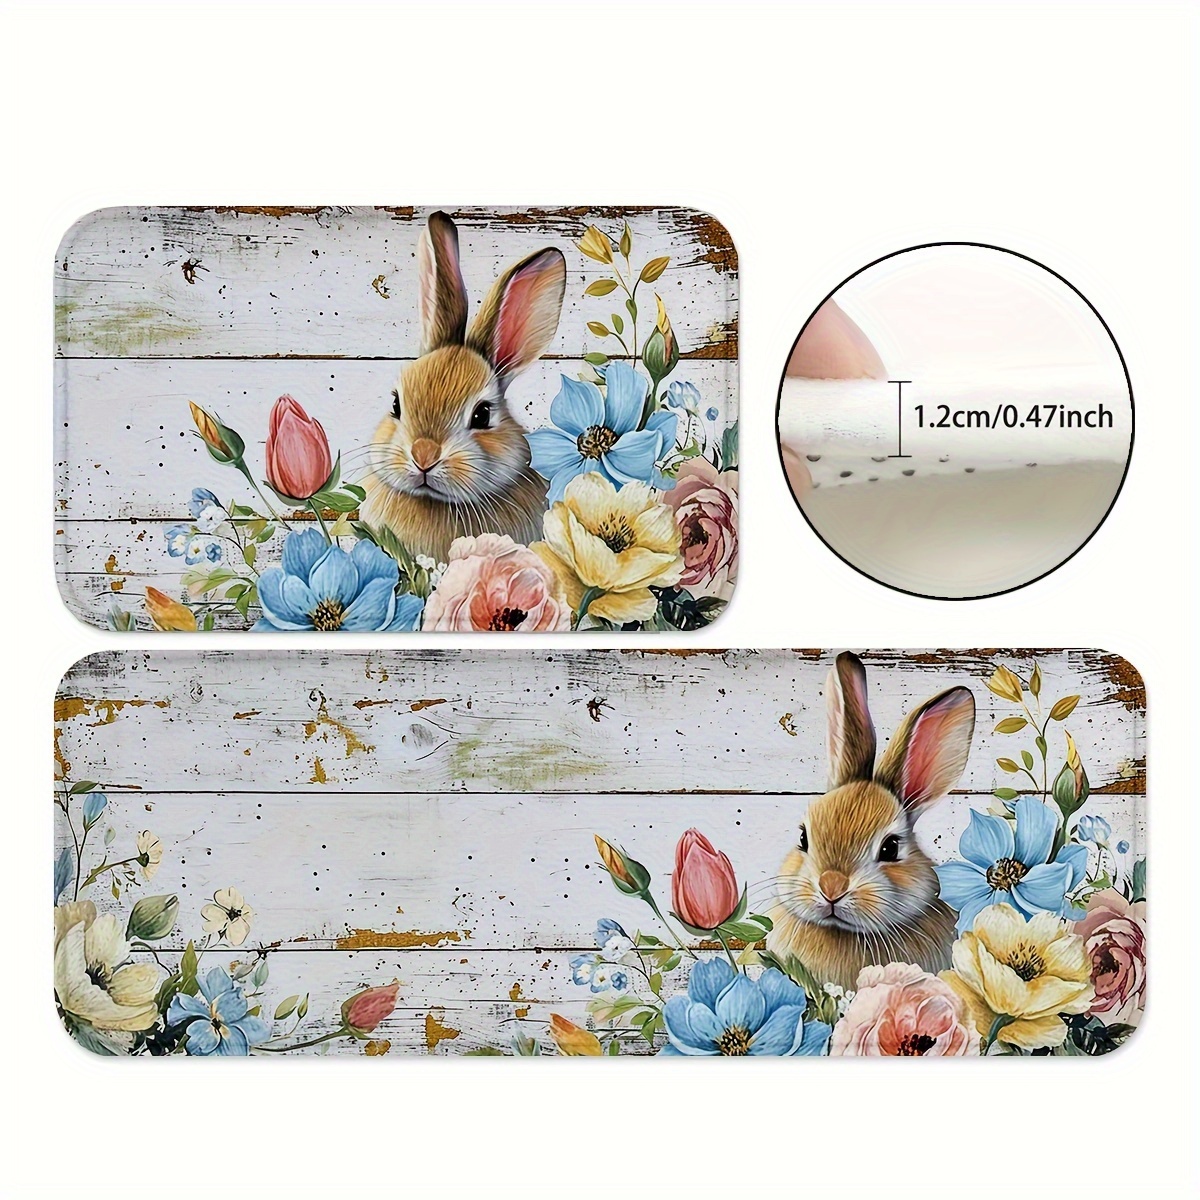 

1/2pcs, Area Rug, Easter Kitchen Mats, Non-slip And Durable Bathroom Pads, Comfortable Standing Runner Rugs, Carpets For Kitchen, Home, Office, Sink, Laundry Room, Bathroom, Spring Decor